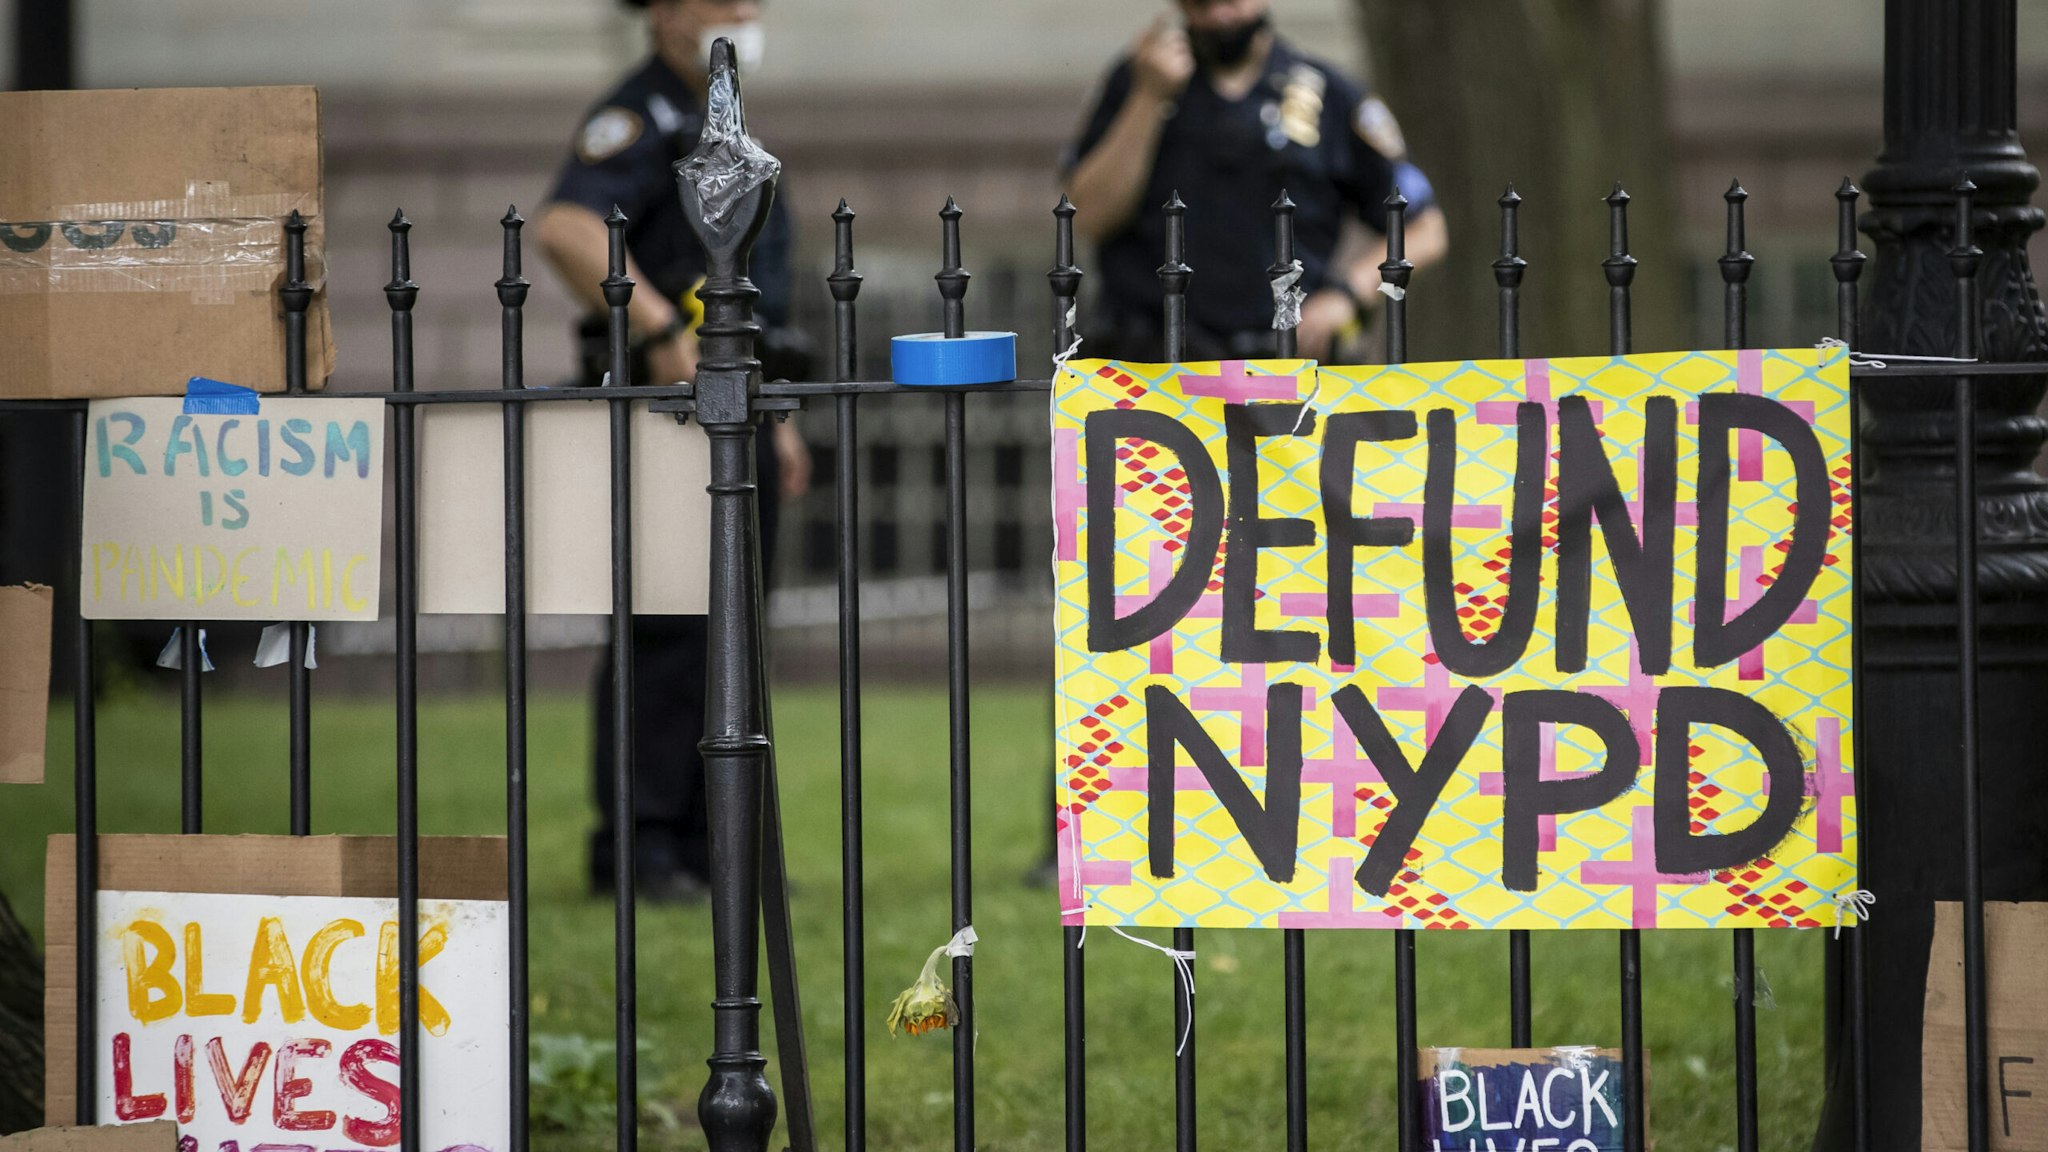 MANHATTAN, NY - JUNE 30: Protesters signs hang on the gate in City Hall Park during the Occupy City Hall protests that say, "Defund NYPD" and "BLM" with NYPD police officers in the background. Earlier in the day, one of the members of Warriors in the Garden was beaten and arrested by police. This was part of the Occupy City Hall effort which has seen protesters camping out for days until today where New York City Council is to vote on the NYPD Budget. Protesters continue taking to the streets across America and around the world after the killing of George Floyd at the hands of a white police officer Derek Chauvin that was kneeling on his neck during for eight minutes, was caught on video and went viral. During his arrest as Floyd pleaded, "I Can't Breathe". The protest are attempting to give a voice to the need for human rights for African American's and to stop police brutality against people of color. They are also protesting deep-seated racism in America. Many people were wearing masks and observing social distancing due to the coronavirus pandemic. Photographed in the Manhattan Borough of New York on June 30, 2020, USA. (Photo by Ira L. Black/Corbis via Getty Images)